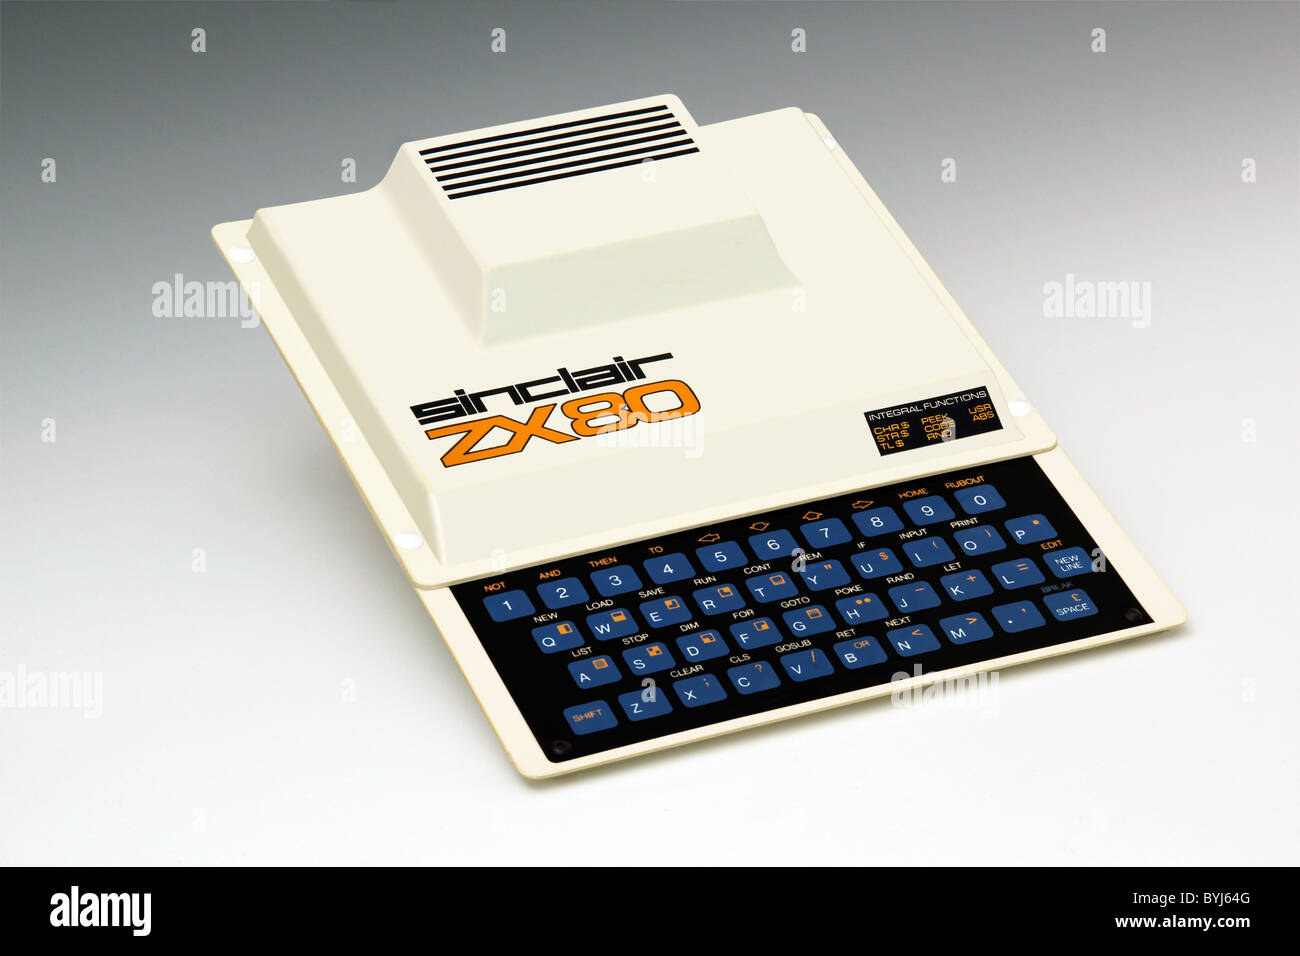 Sinclair ZX80 Personal Computer from 1980. Tony Rusecki Stock Photo